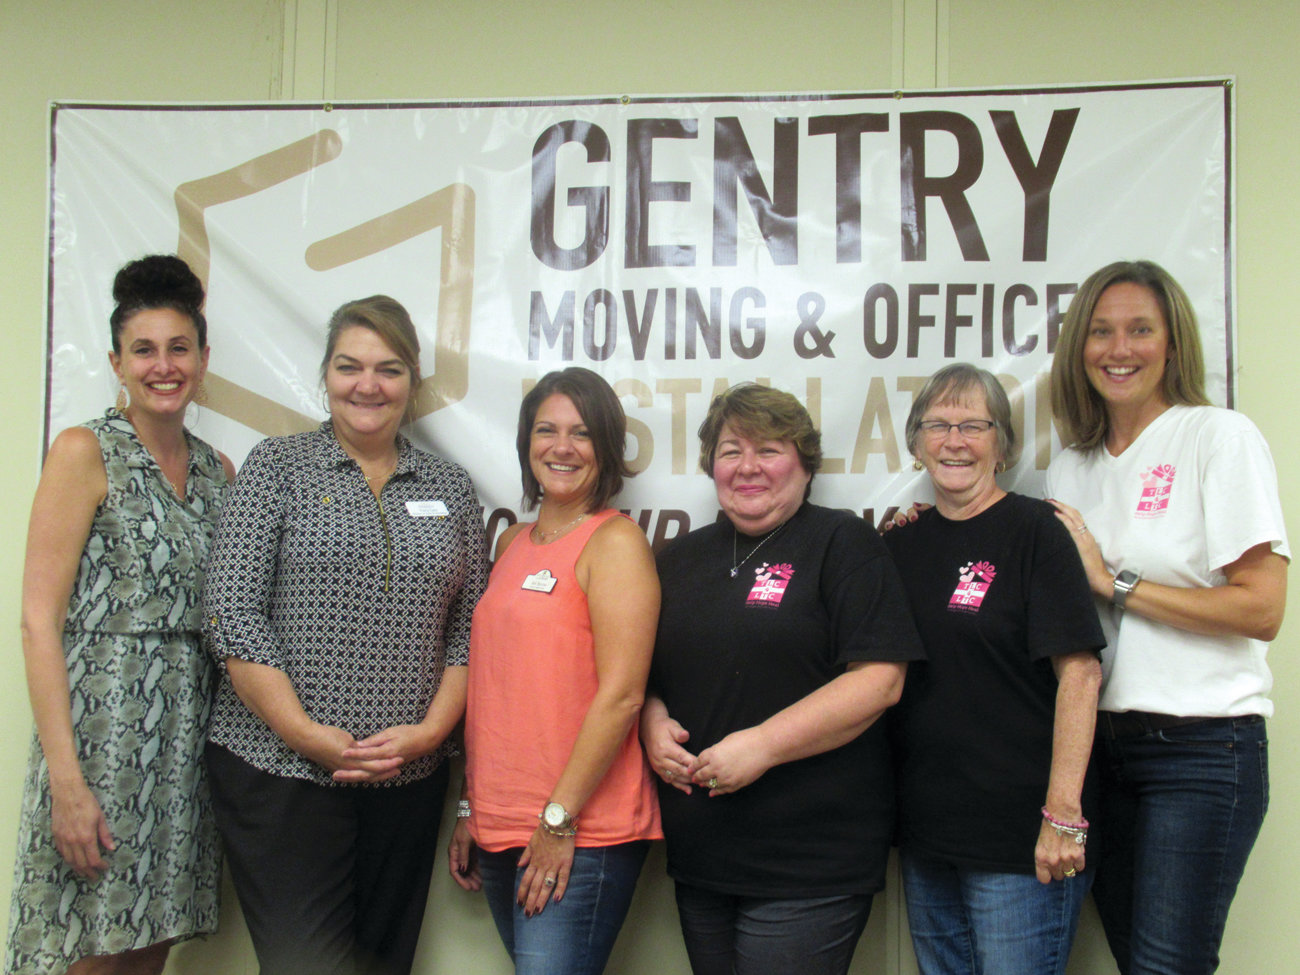 SPECIAL SUPPORTERS: Christine Crum, left, who owns and operates Gentry Moving & Storage in Cranston, co-chaired the Cornhole Elimination Tournament and hosted the fundraiser when the event was threatened by rain. She’s joined by committee members Tracy Cale, Jen Burns, Lisa Ferreira and Karen Morin. Not pictured are Kelly Marot and Pam Marchetti.